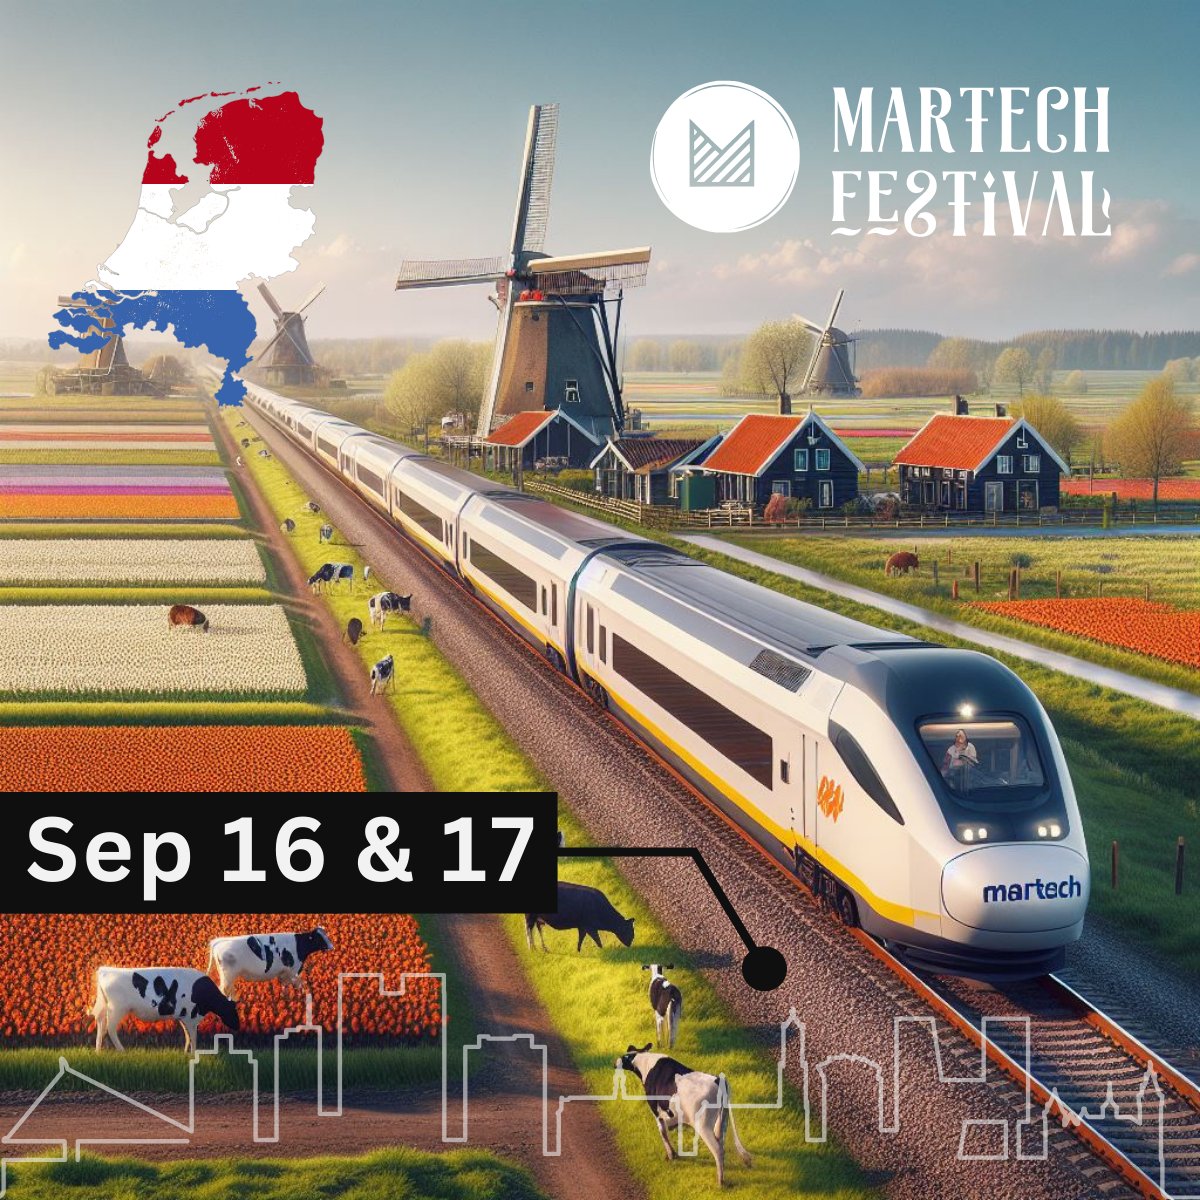 The #martech train is coming to town, see you in Utrecht, Amsterdam or Breda (Agencies Only)?